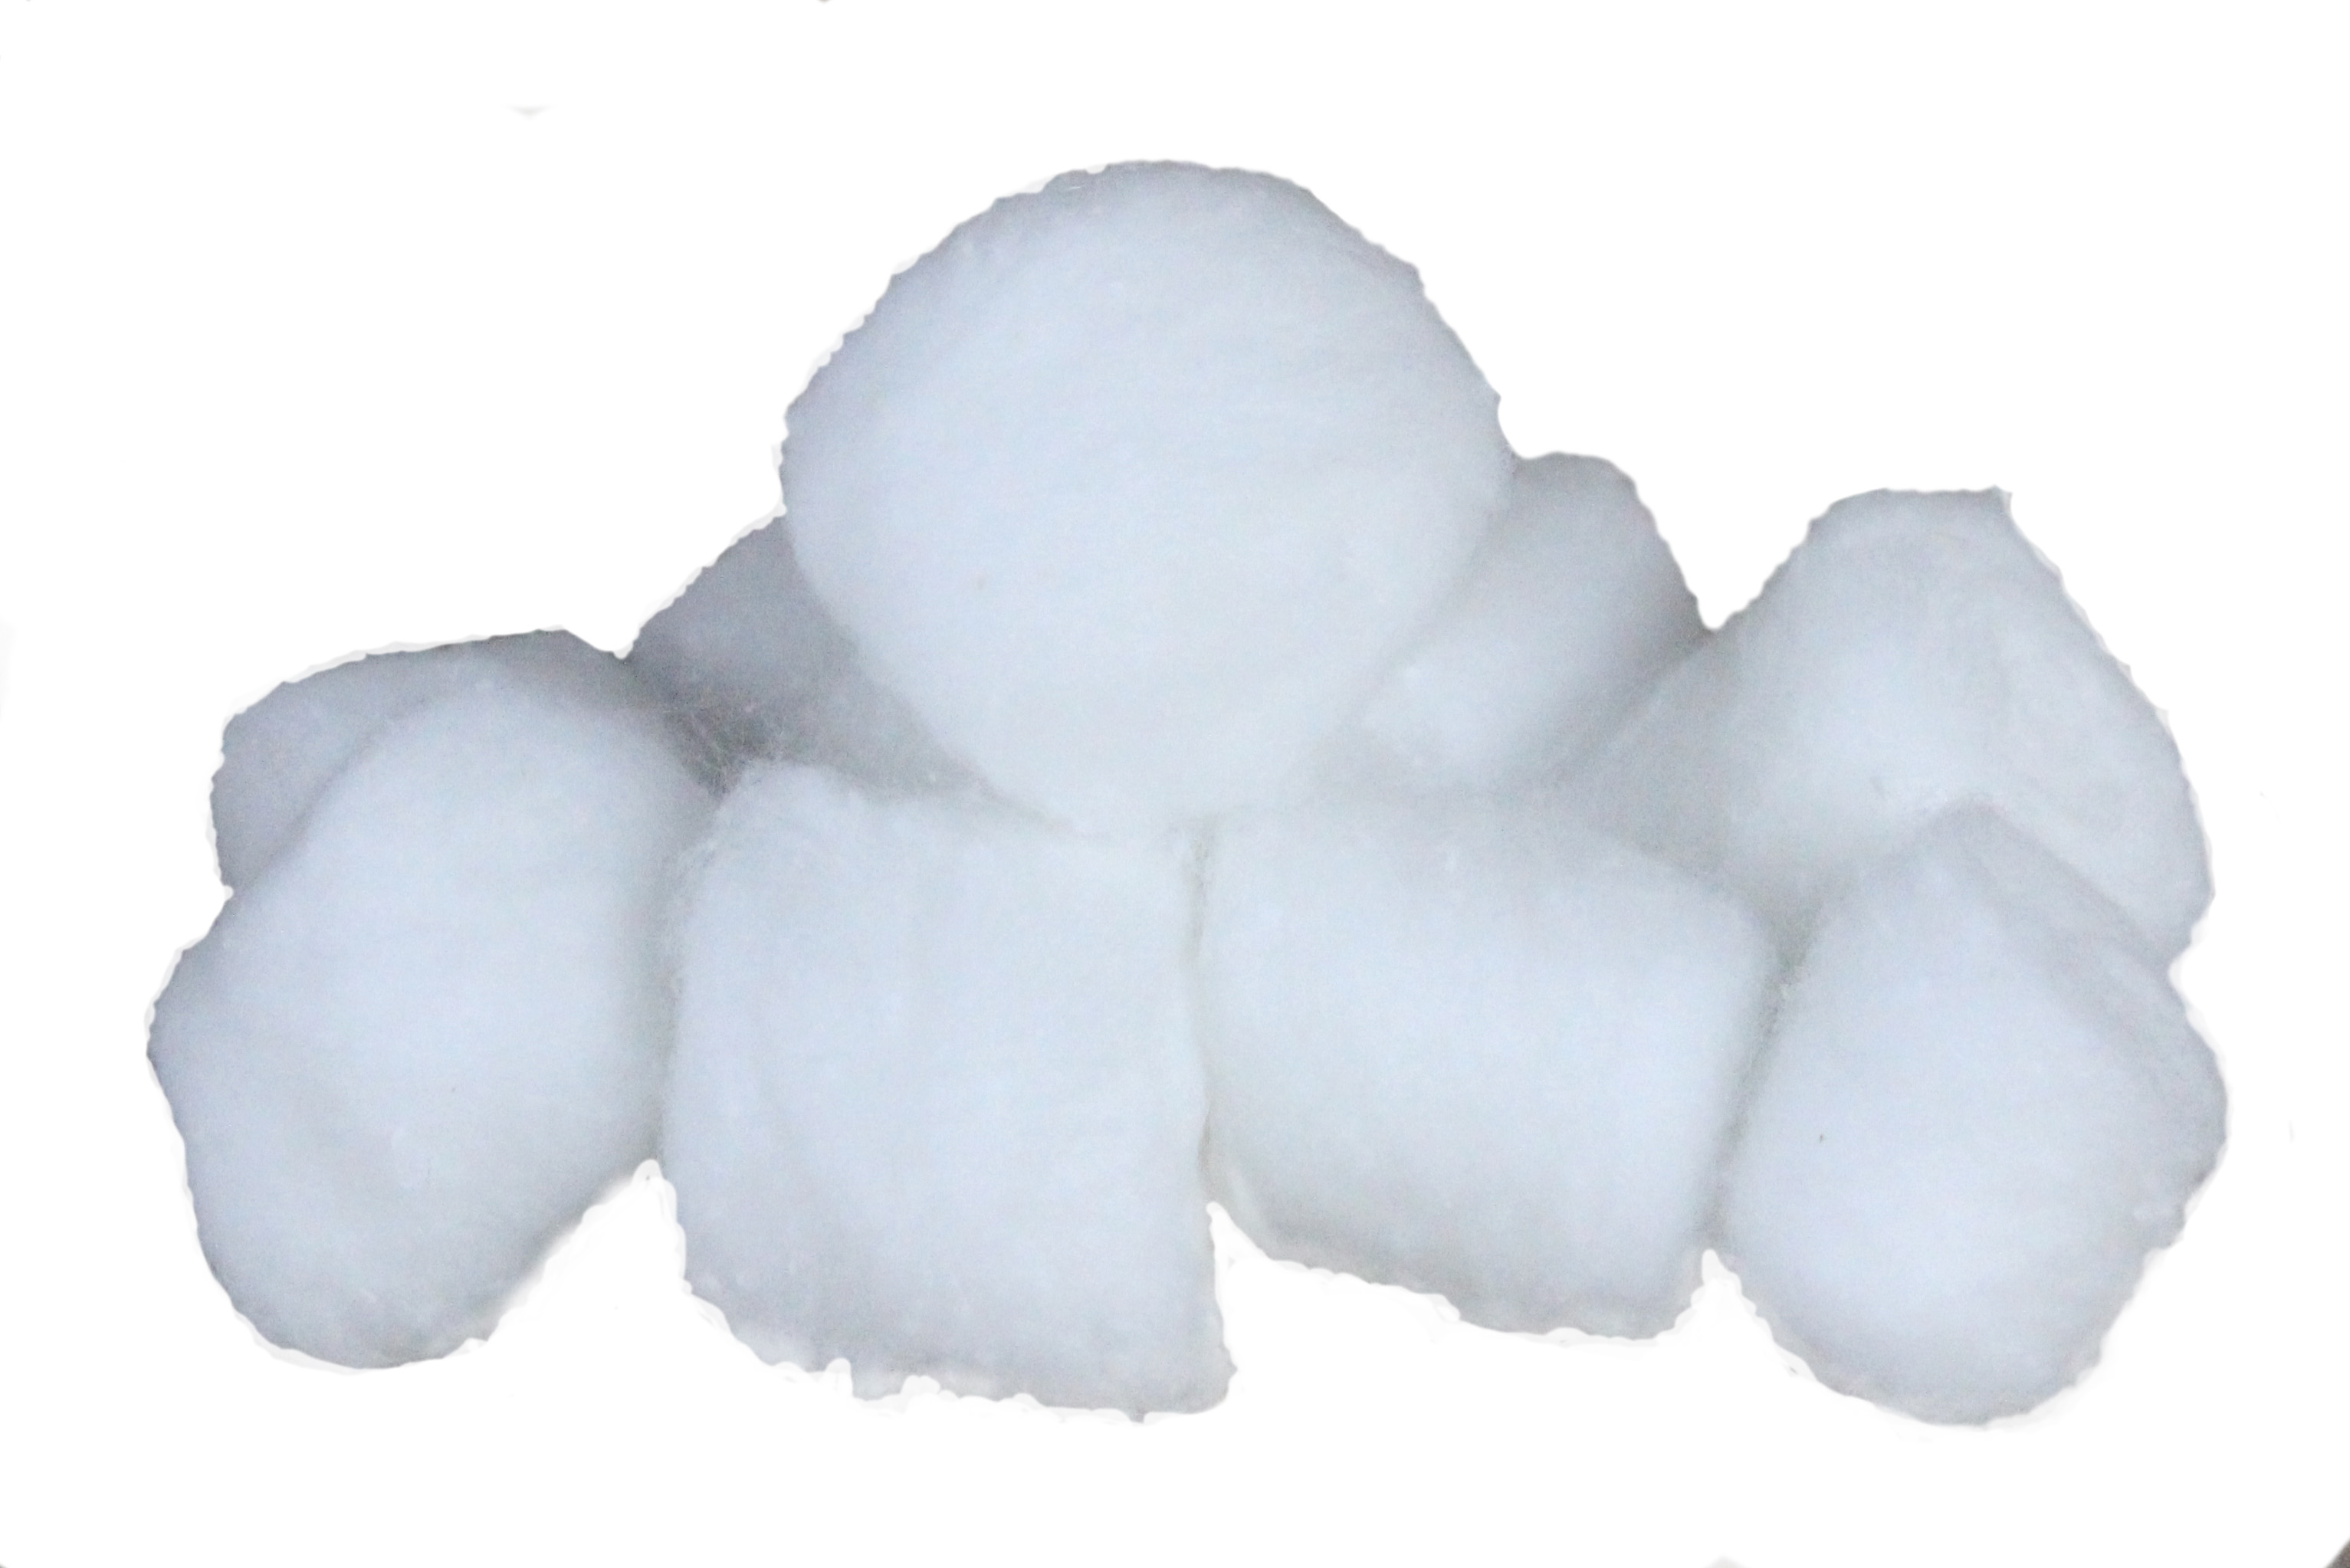 wholesale Cotton Ball Manufacture and Supplier